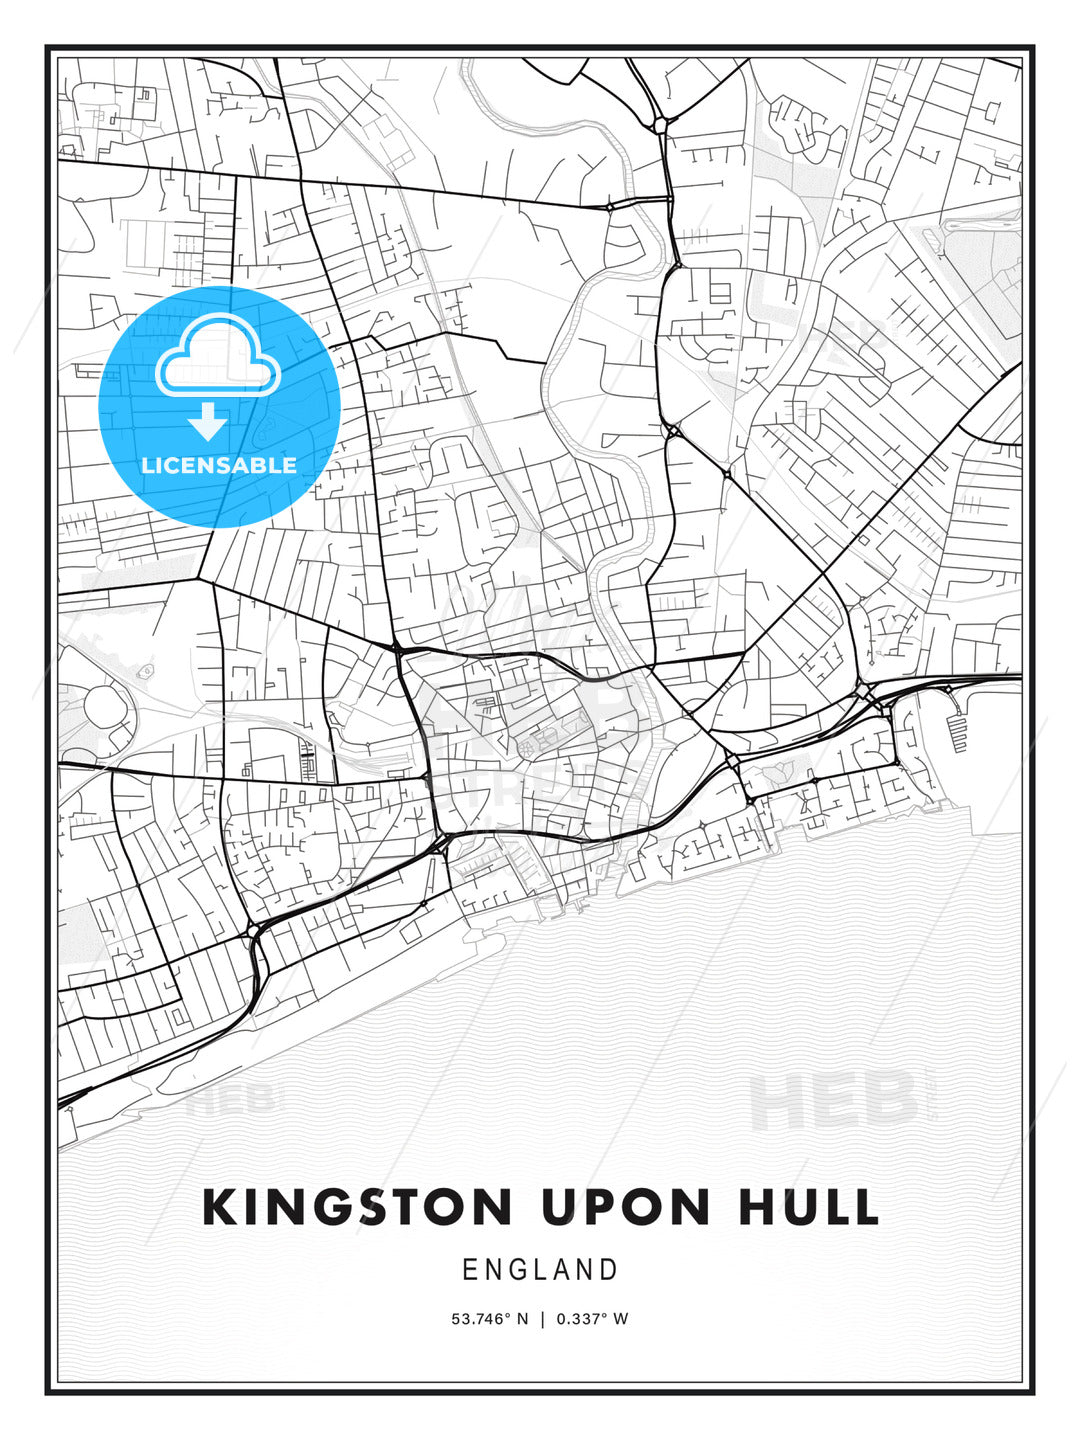 Kingston upon Hull, England, Modern Print Template in Various Formats - HEBSTREITS Sketches